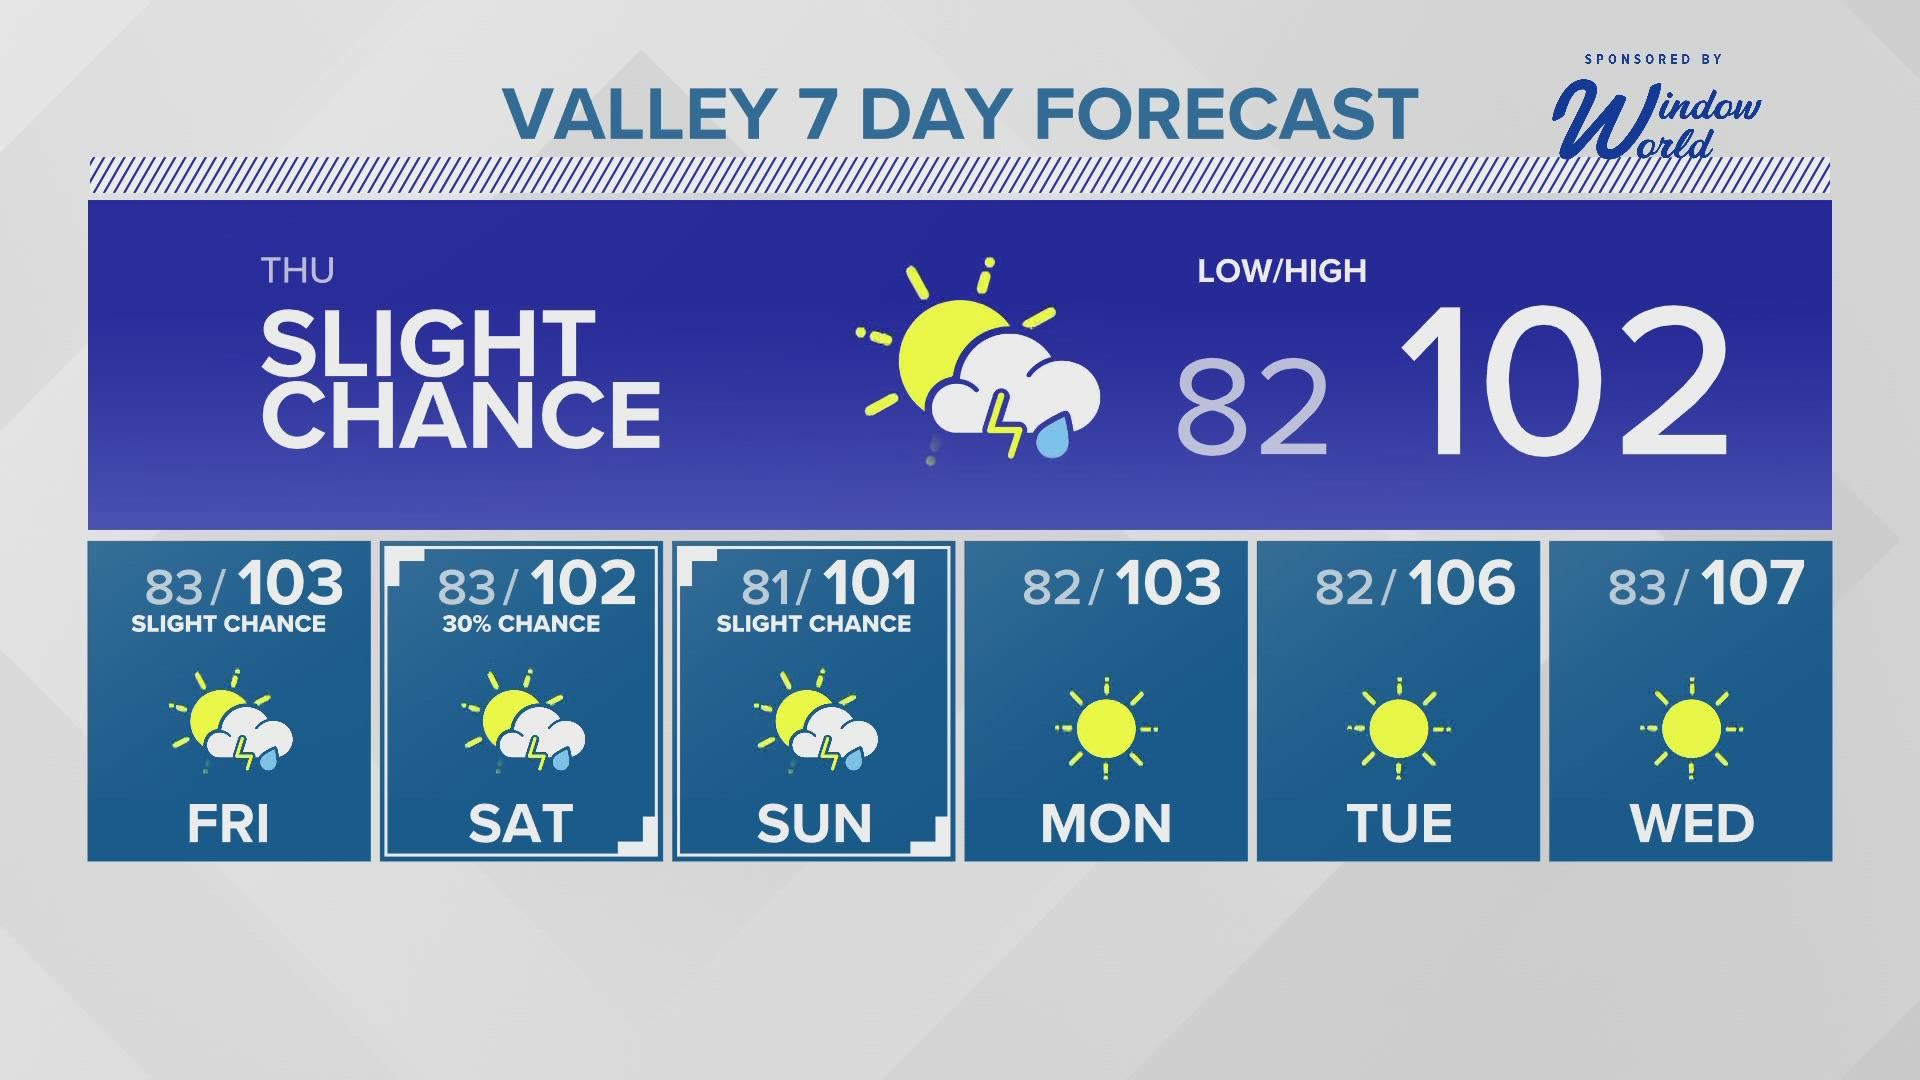 As we get closer to the weekend, we'll see more dry weather around Arizona